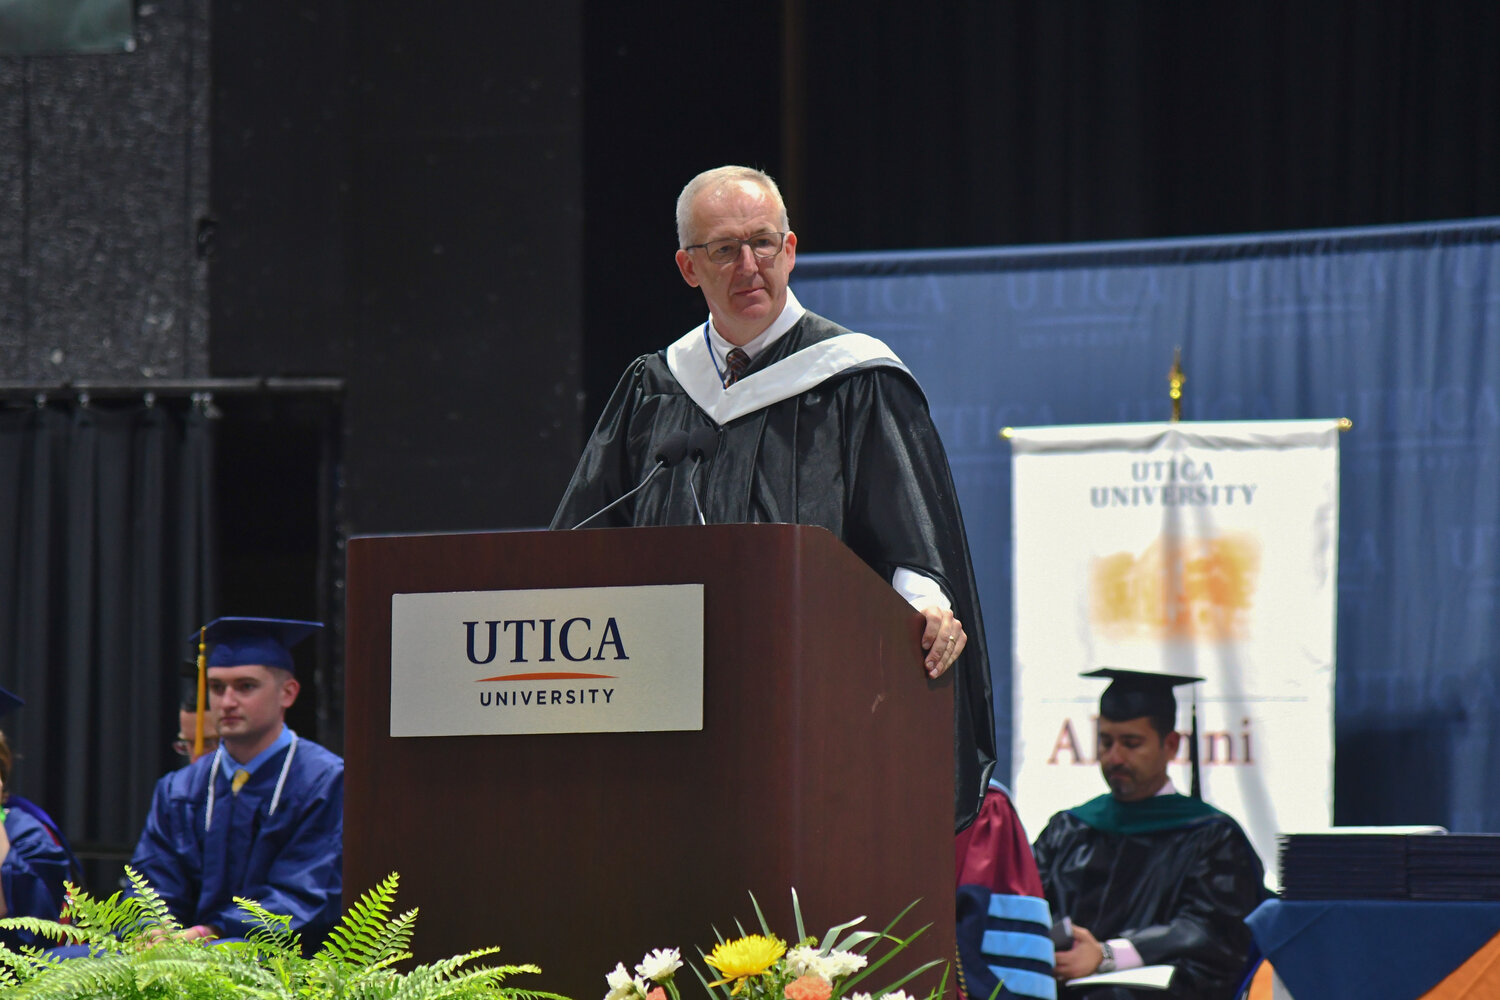 Greg Sankey gives the commencement address for Utica University's undergraduate ceremony on Thursday at the Adirondack Bank Center. Sankey, who is the Southeastern Conference (SEC) commissioner, worked at Utica University as the intramural director for two years in the late 1980s.